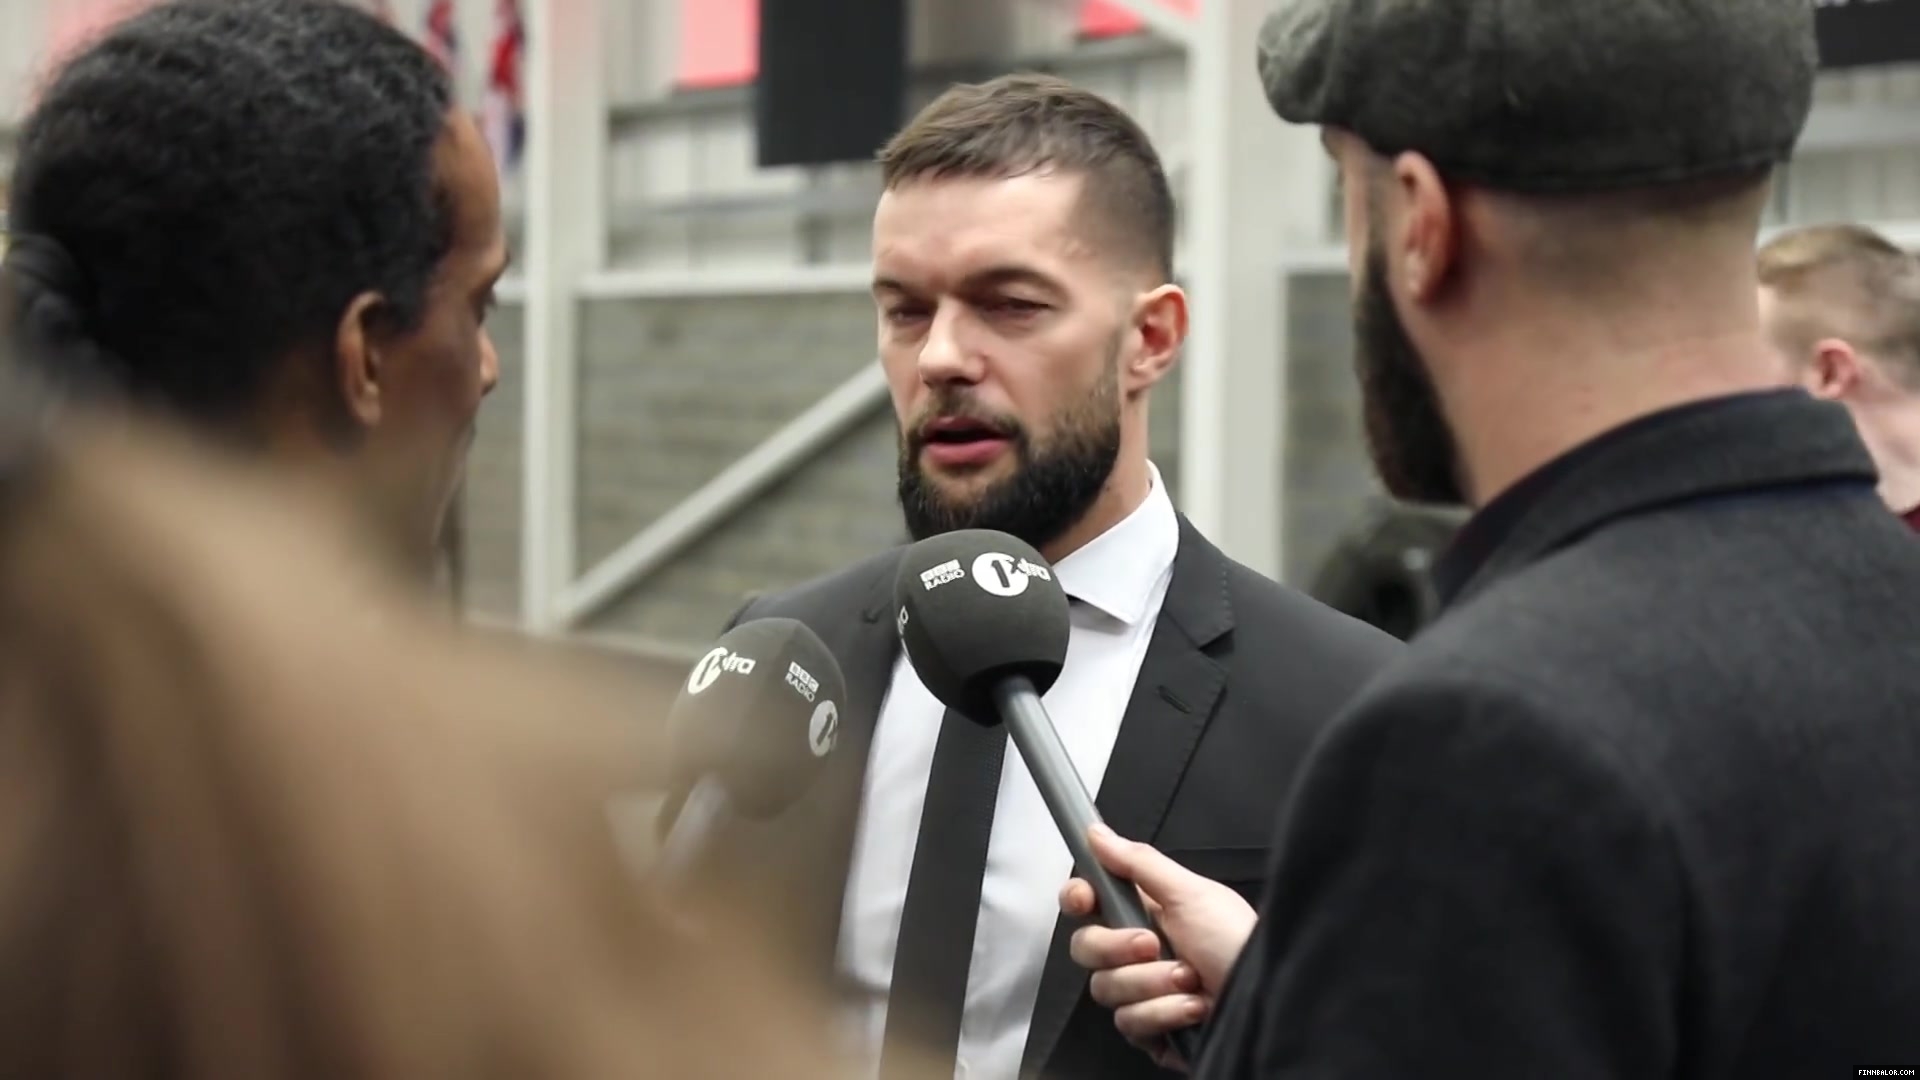 WWE_Superstar_FINN_BALOR_joins_MOUSTACHE_MOUNTAIN_at_the_opening_of_the_NXT_UK_PC_027.jpg